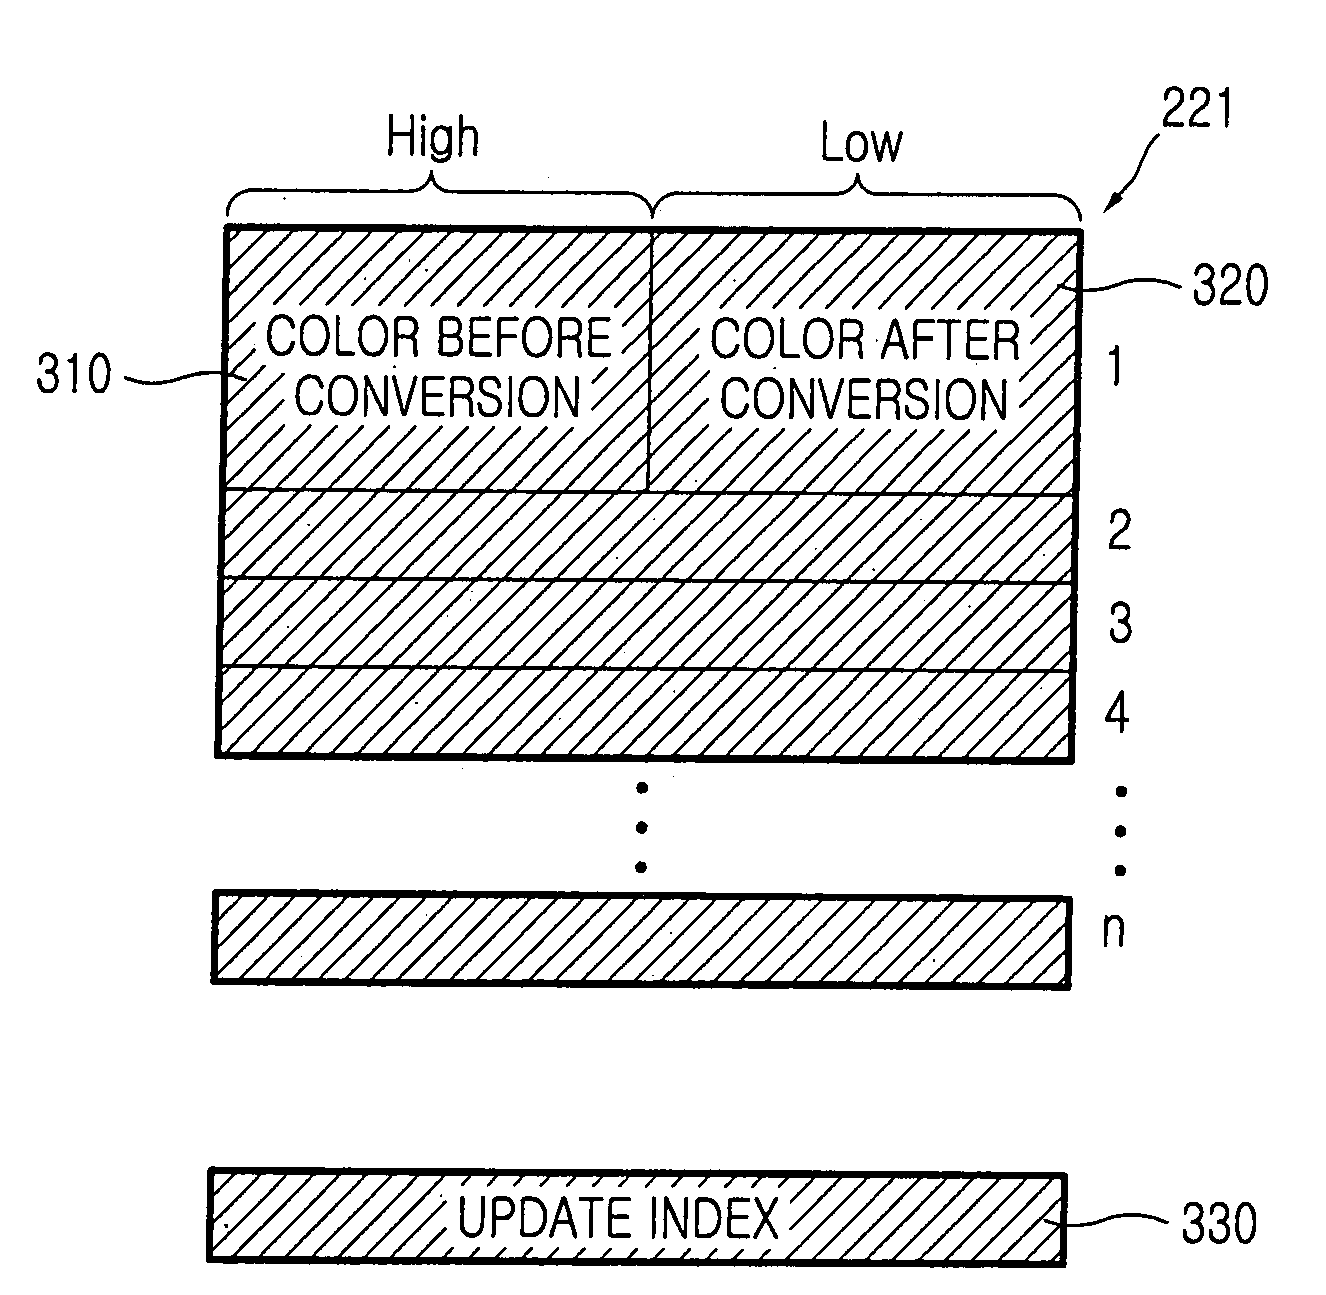 Apparatus and method for performing color conversion using color cache in image processing system